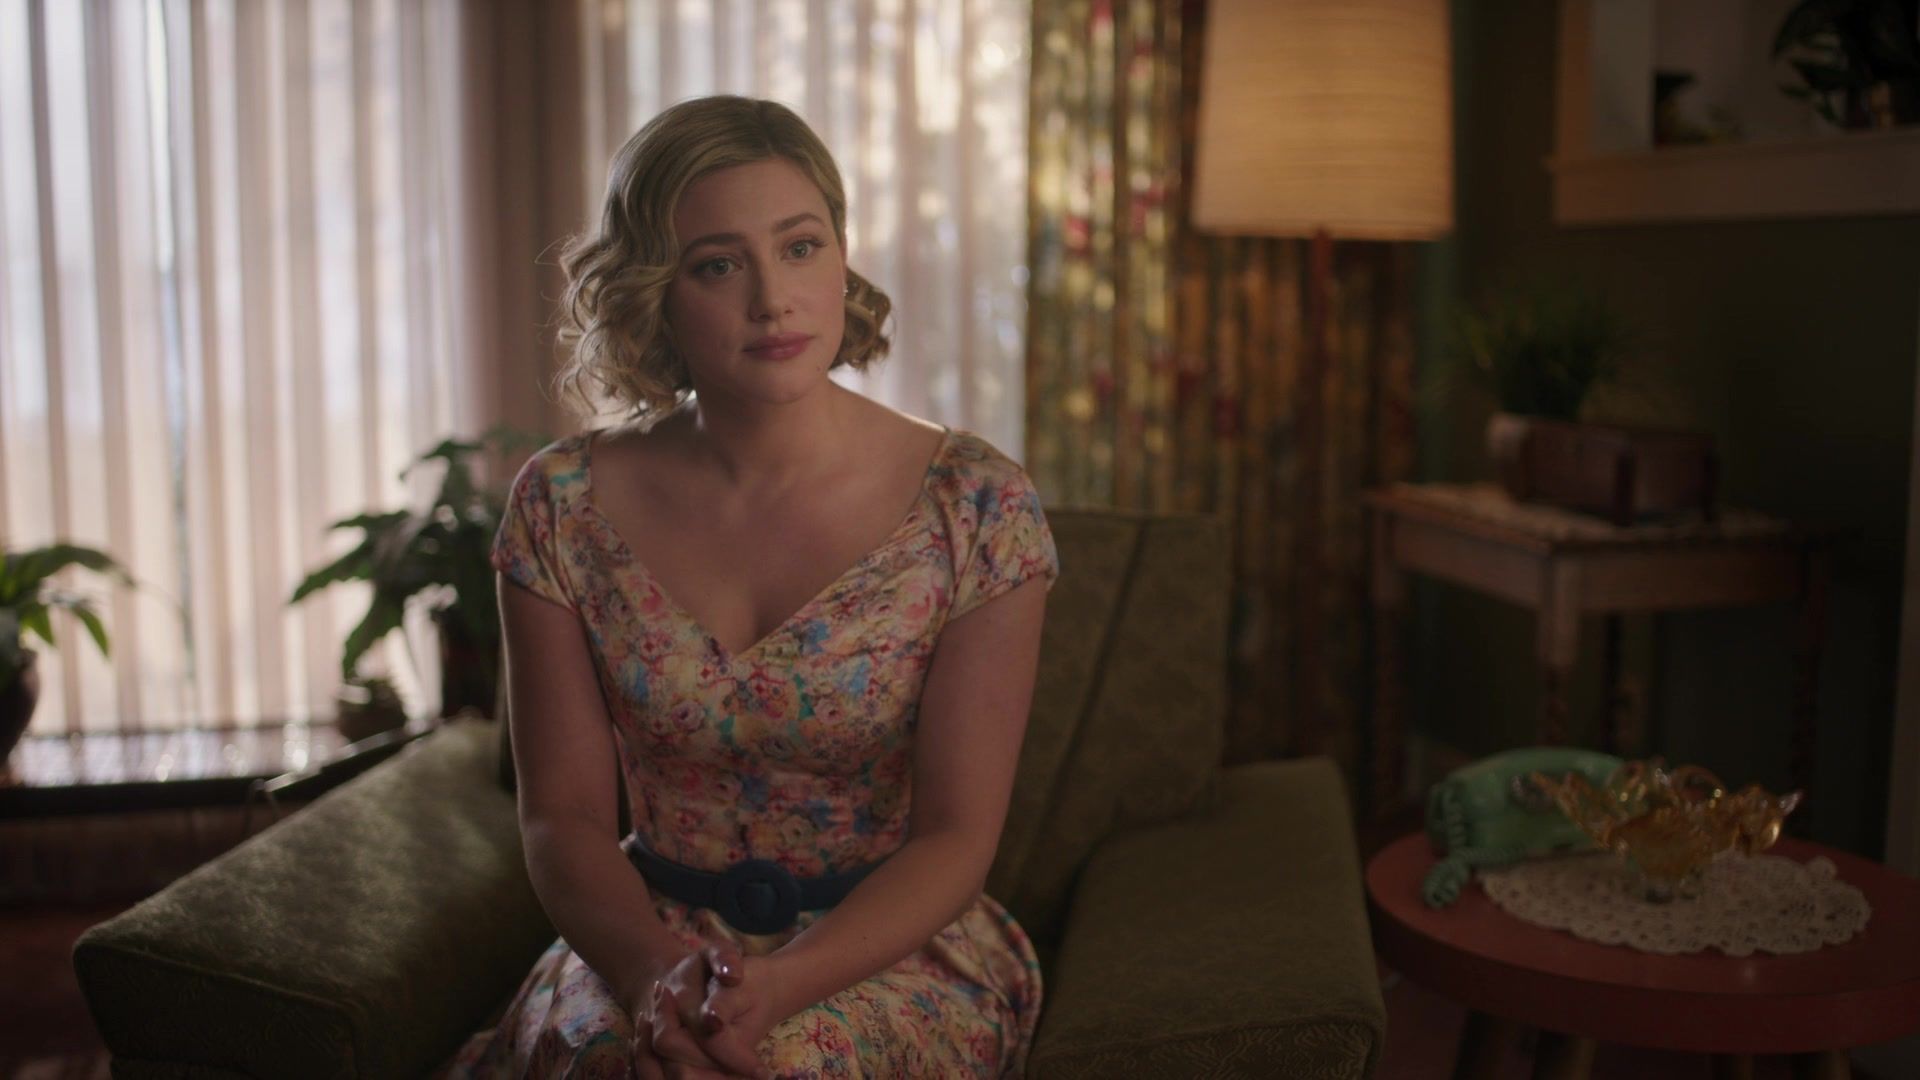 Worn on Riverdale TV Show - Floral Dress Worn by Lili Reinhart as Betty Cooper